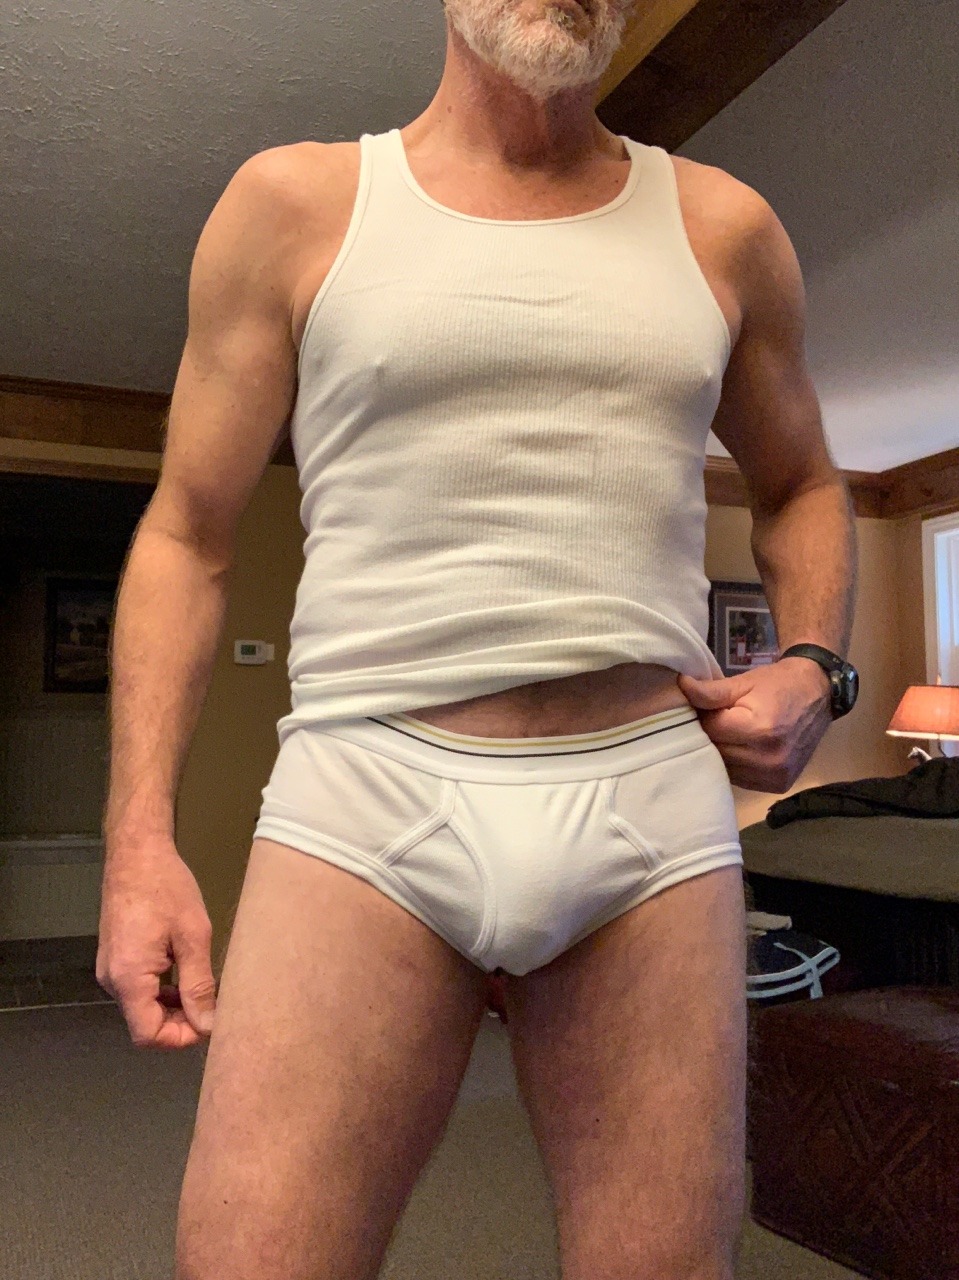 briefs6335:  A friend really likes Staffords so I took this photo for him